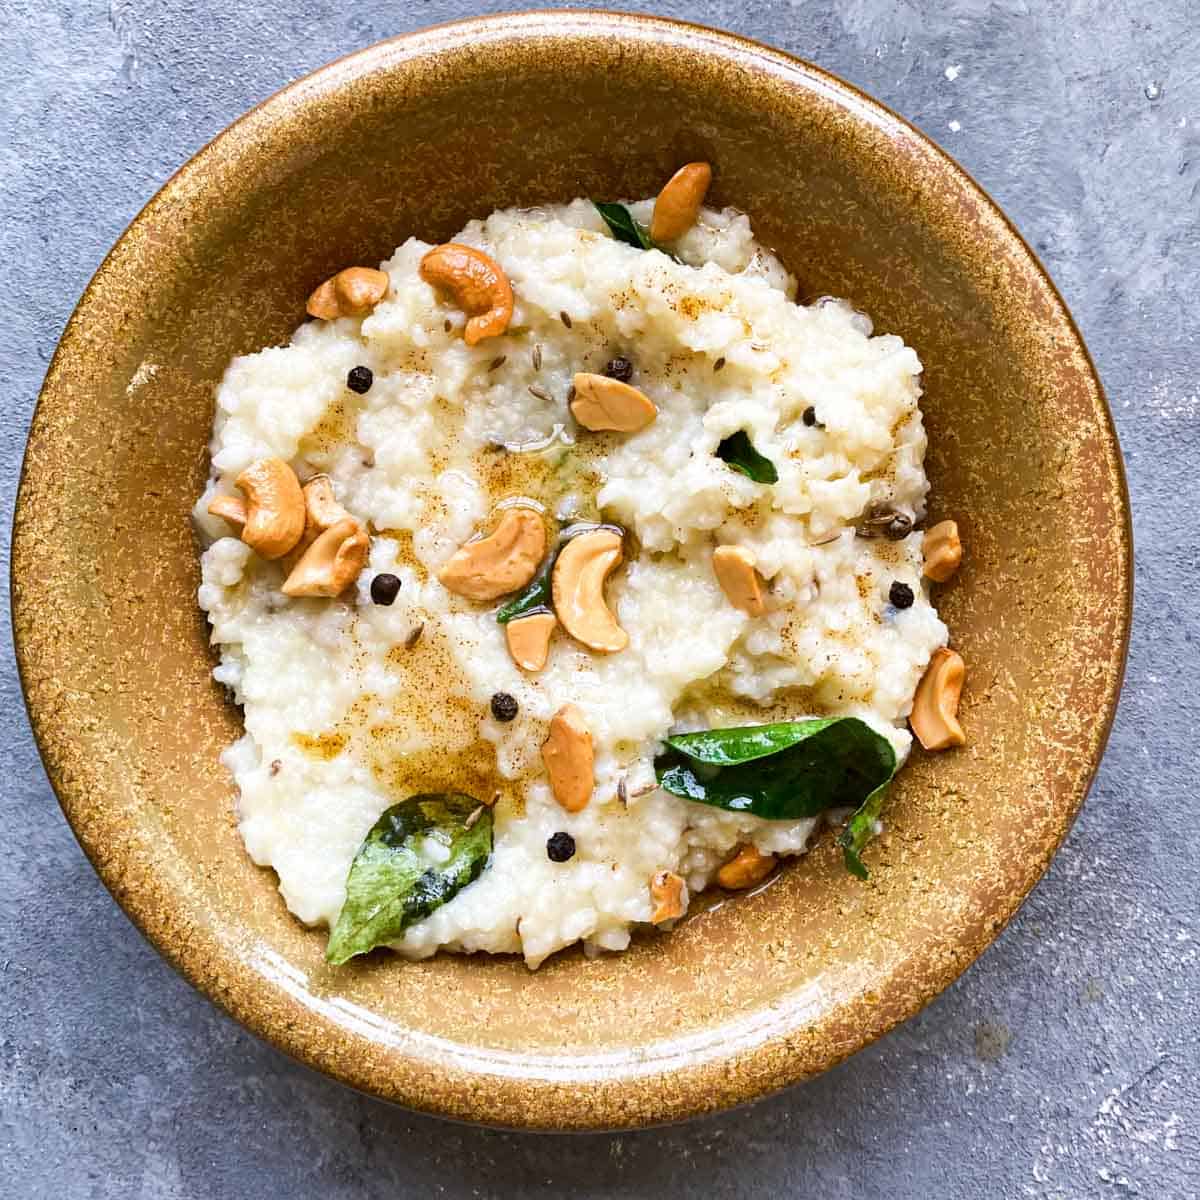 Pongal with toasted cashews in a small bowl